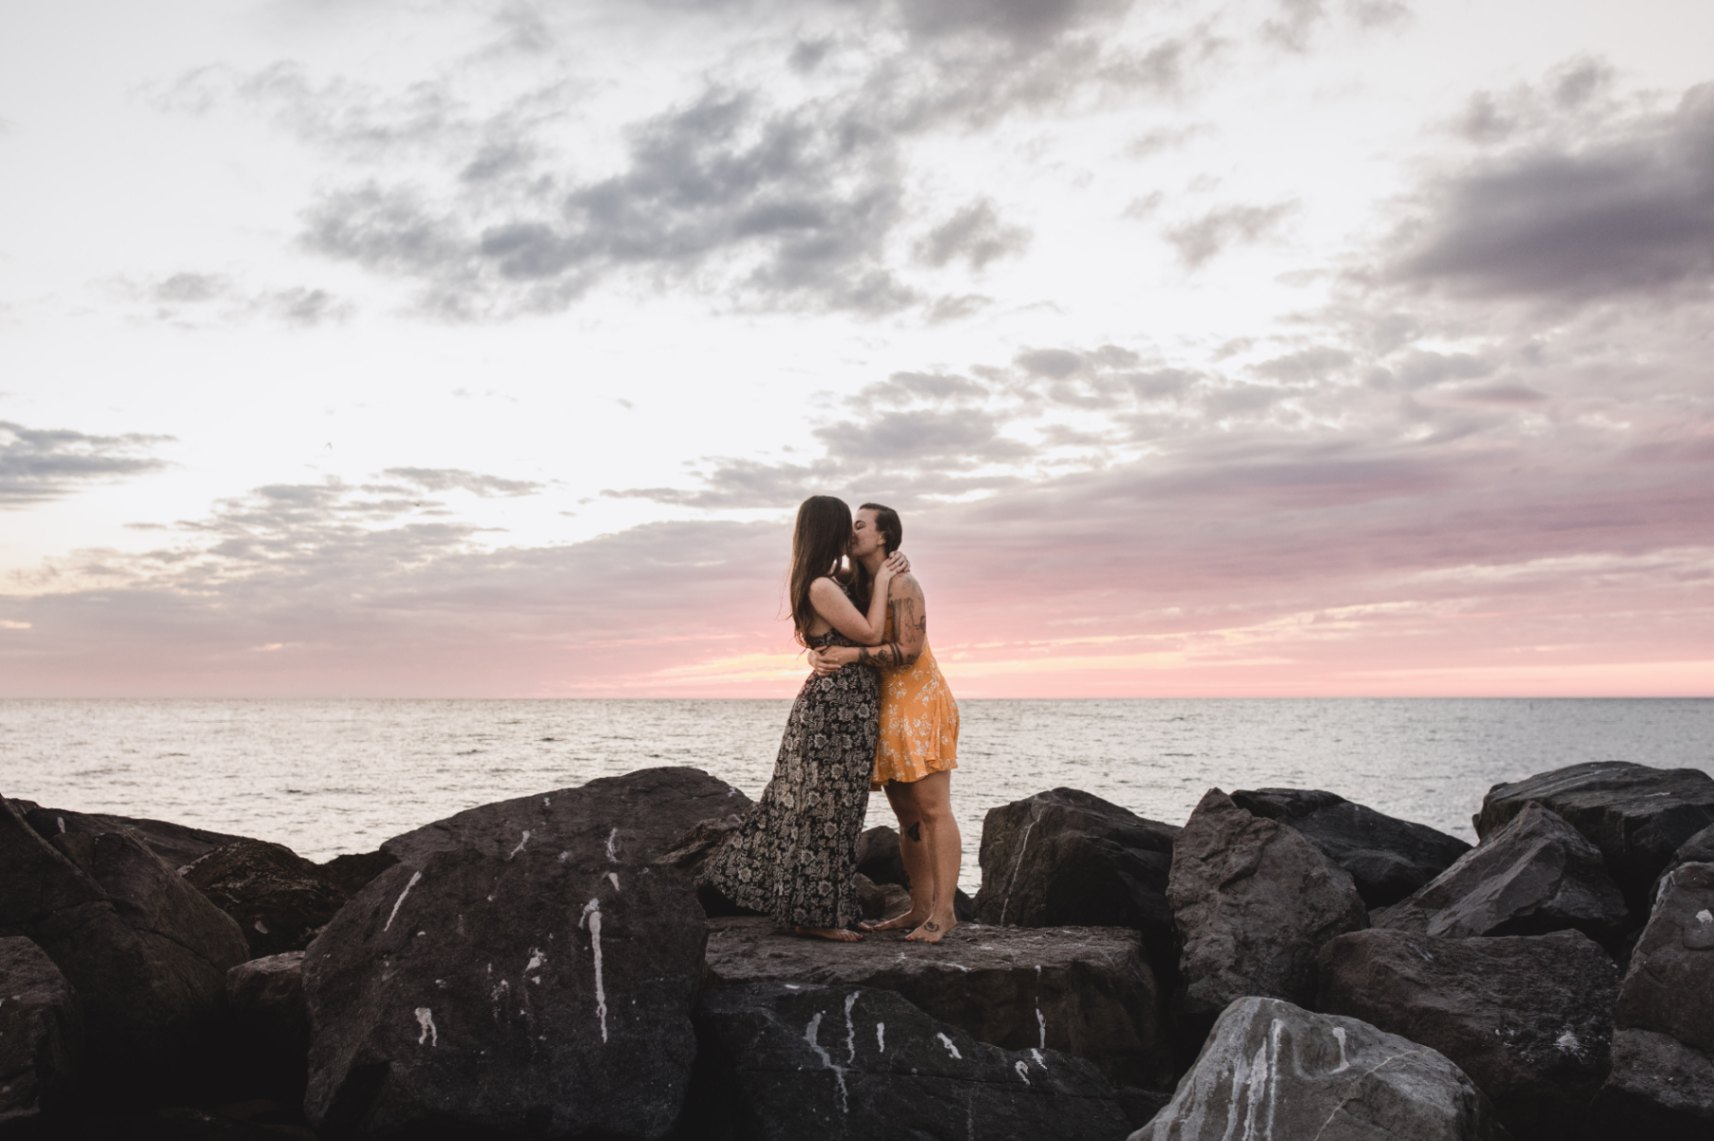 two women in love holding each other while standing and kissing on beach rocks